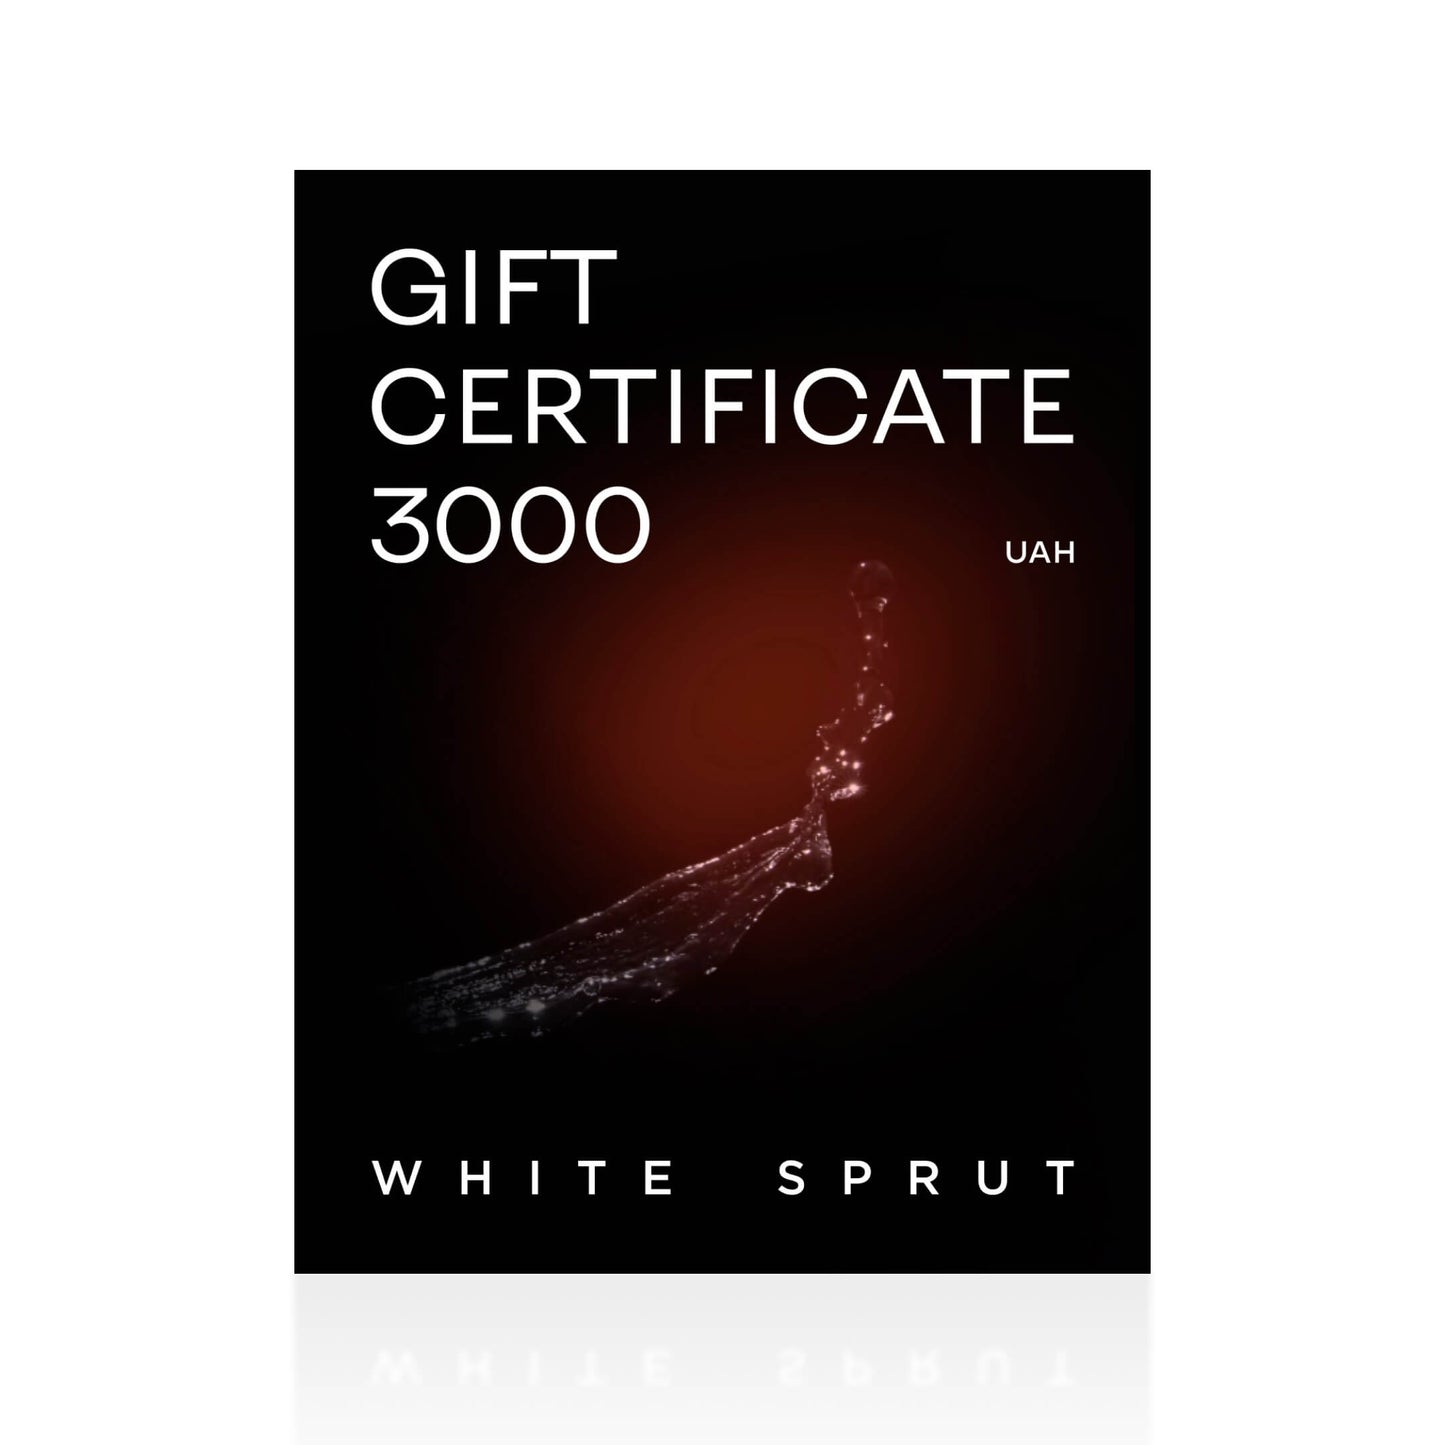 Gift certificate 3000